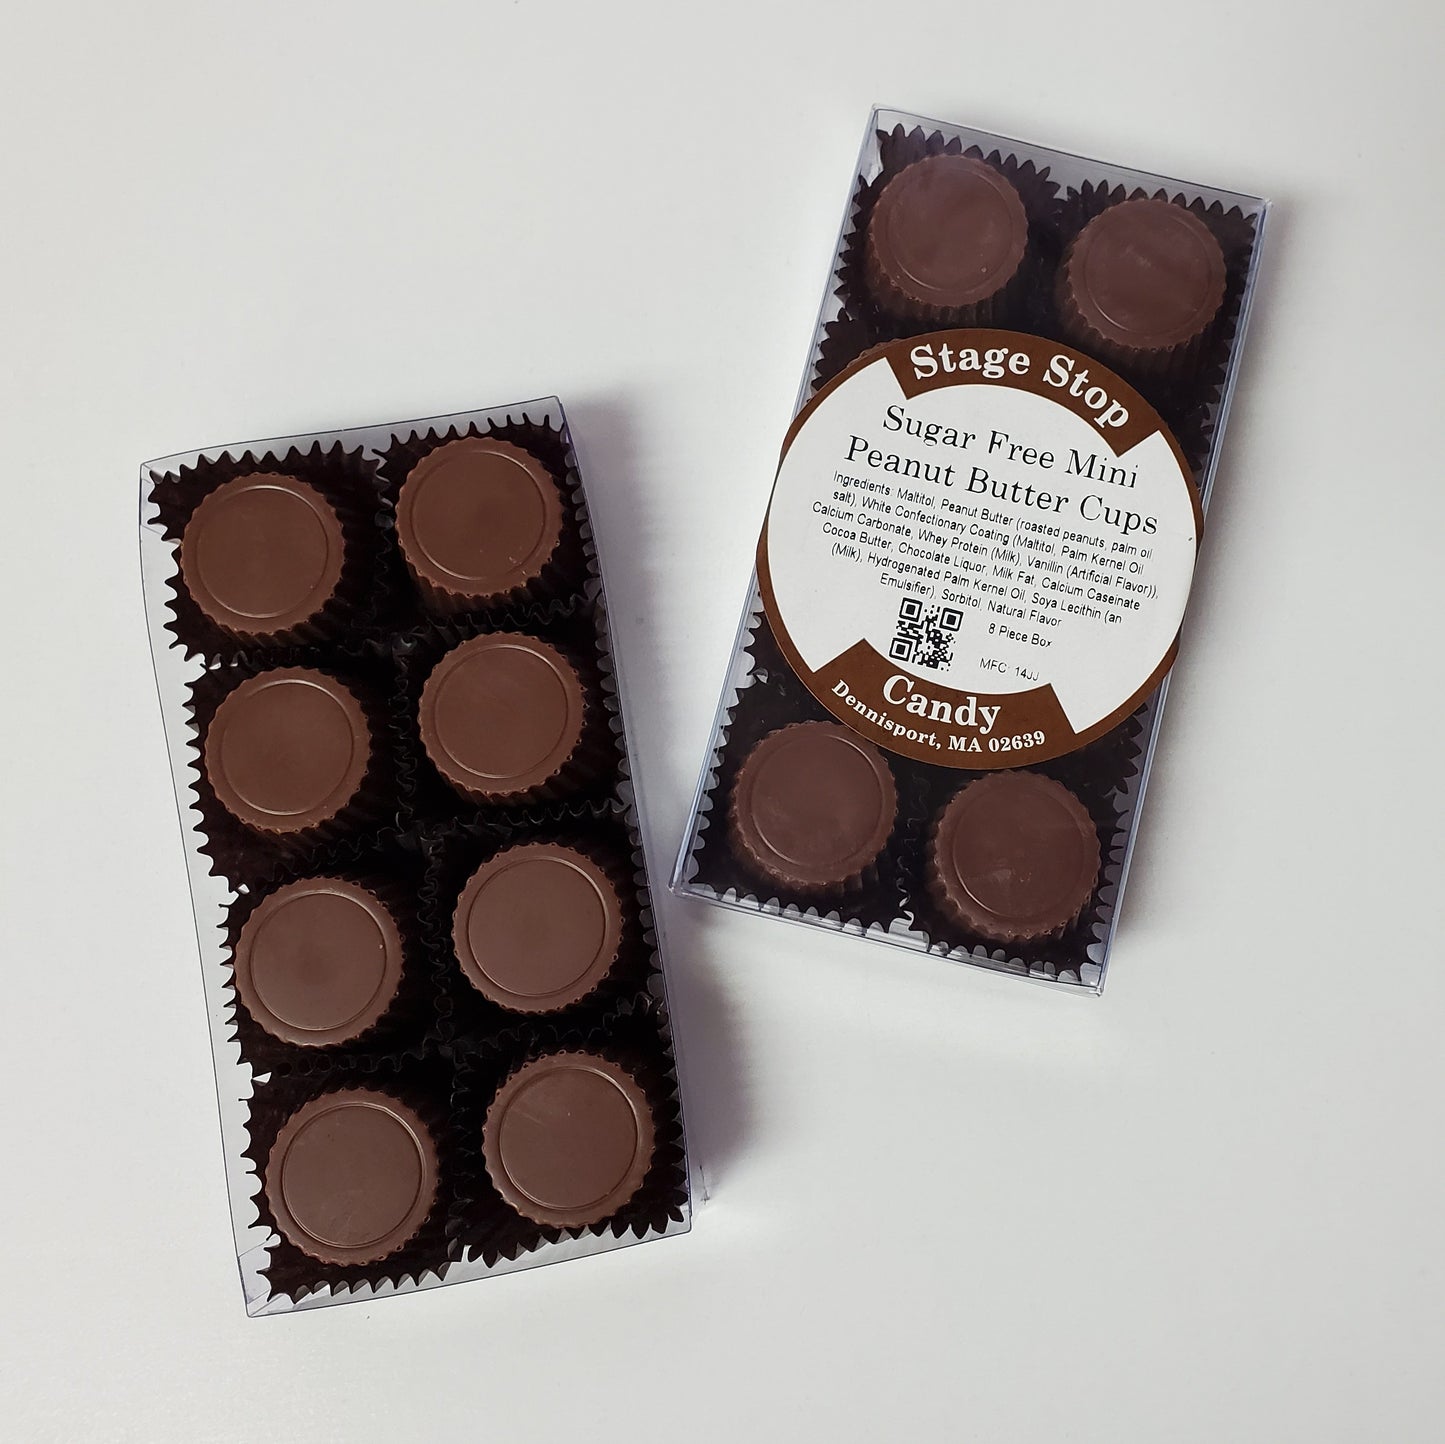 Box of Sugar Free Mini Milk Chocolate Peanut Butter Cups available at Stage Stop Candy in Dennis on Cape Cod